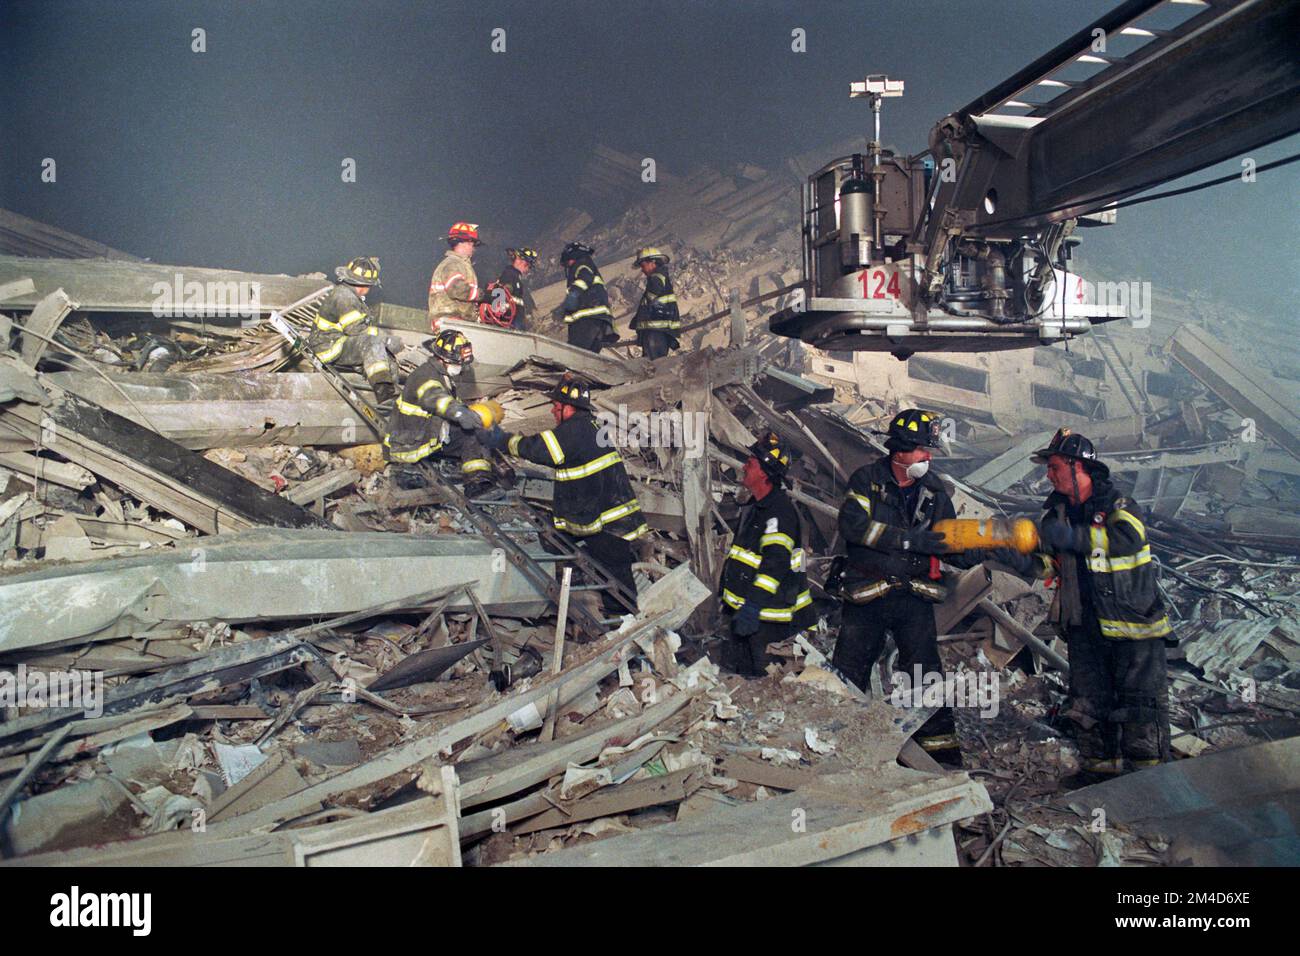 Members of FDNY Ladder Company 124 are assisted by other firefighters as they remove tools and equipment from 'the pile' in the early morning hours of Stock Photo